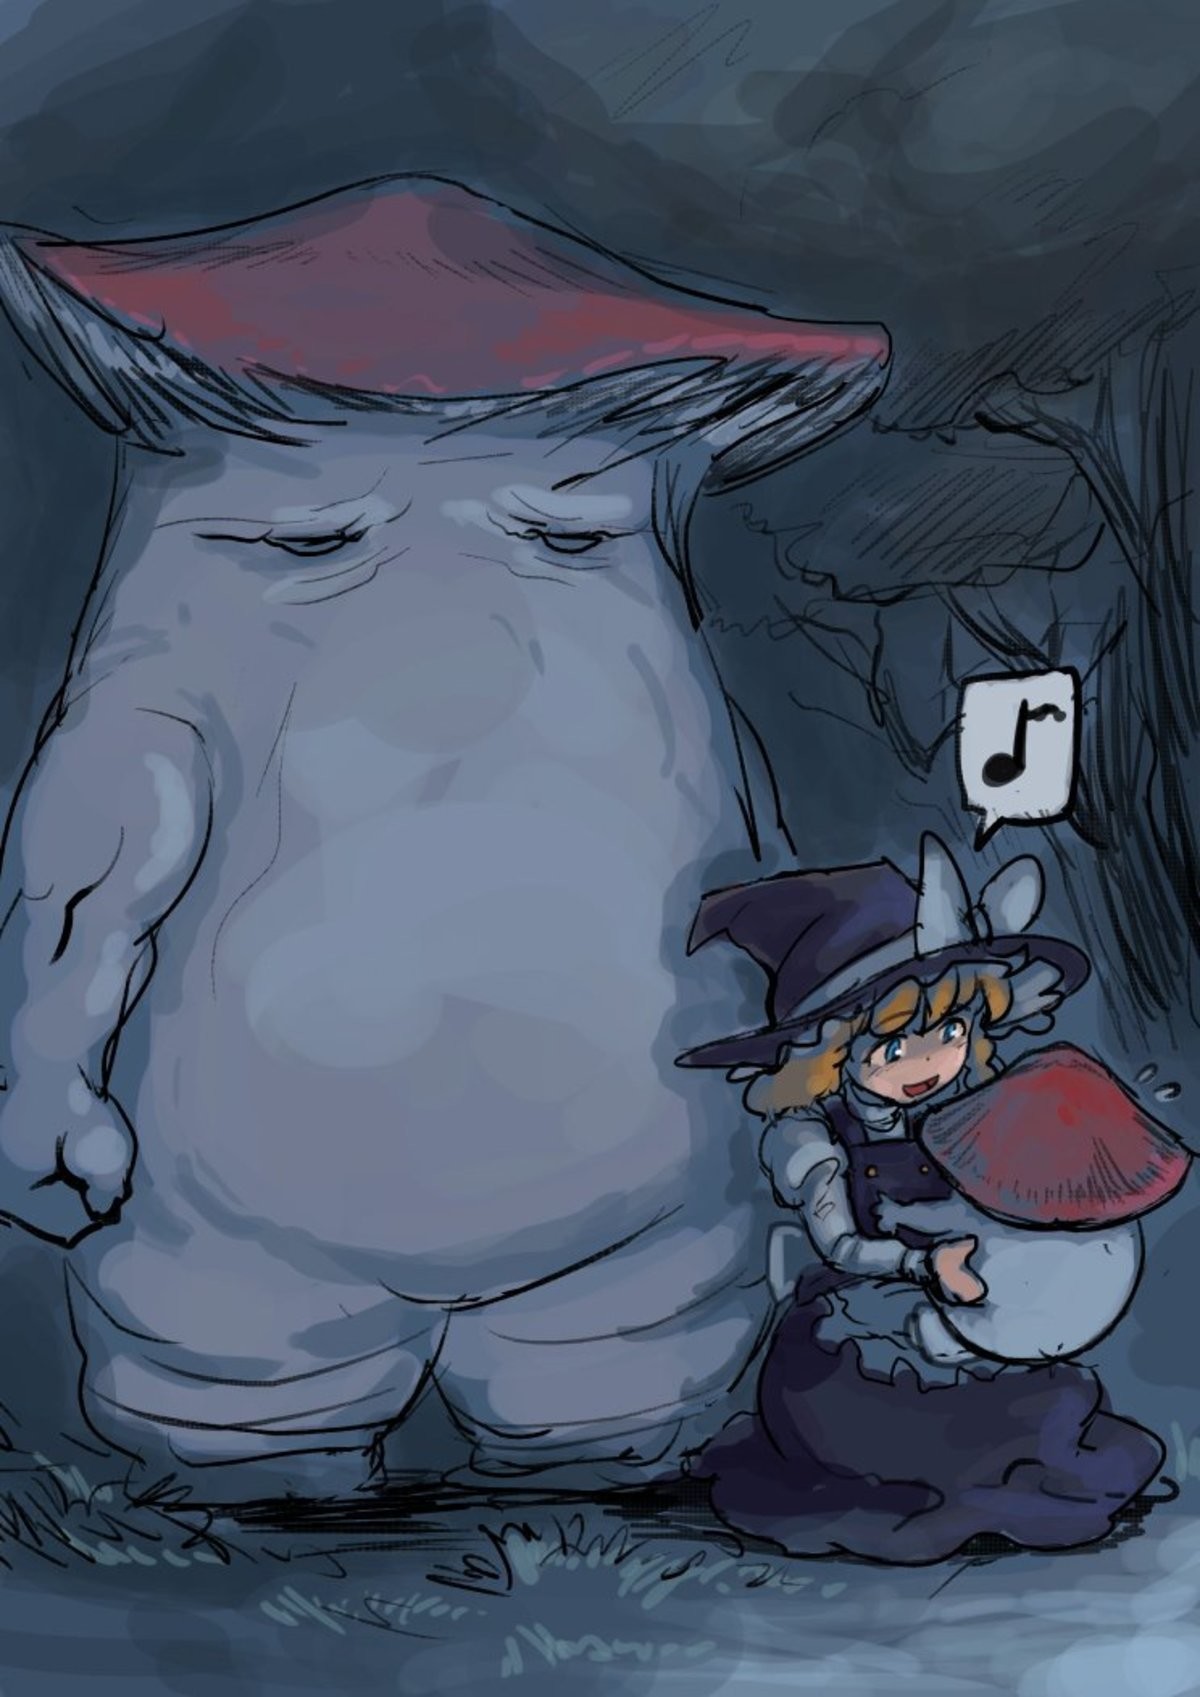 Marisa Found A Rare Mushroom. .. This witch is about to become a satellite